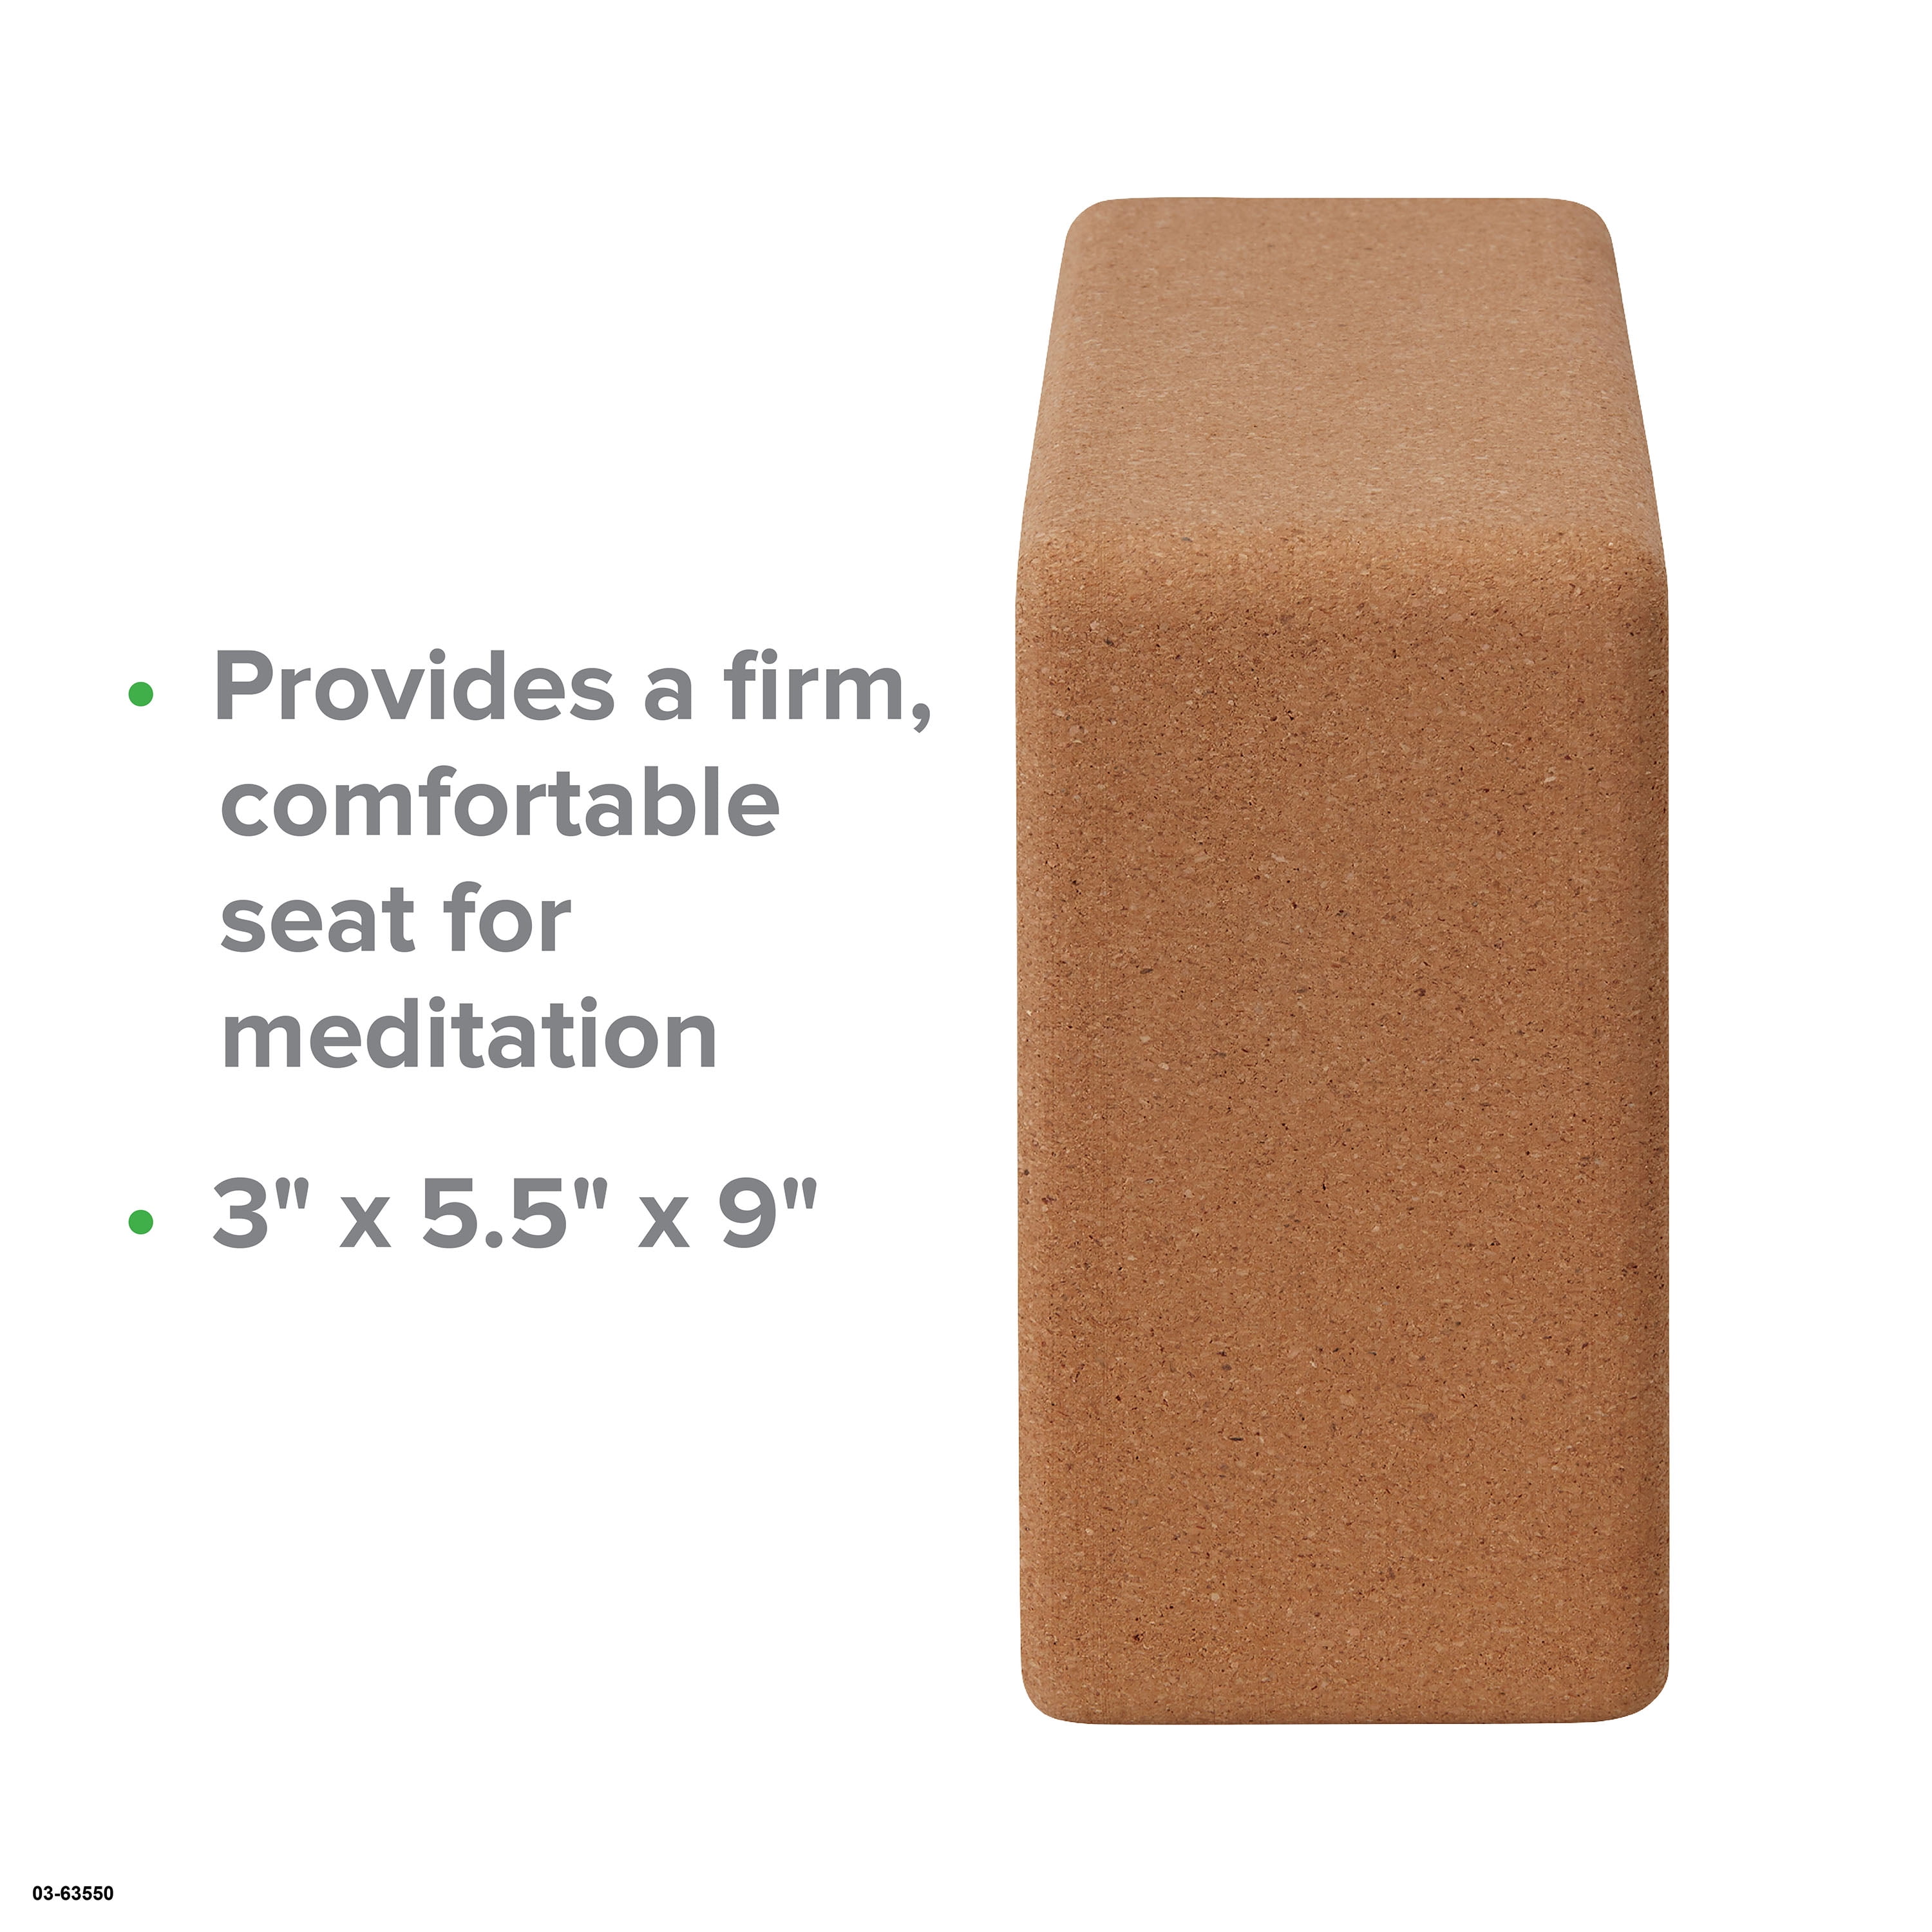 Gaiam Cork Yoga Brick, Made from Sturdy Sustainable Cork, 3 In